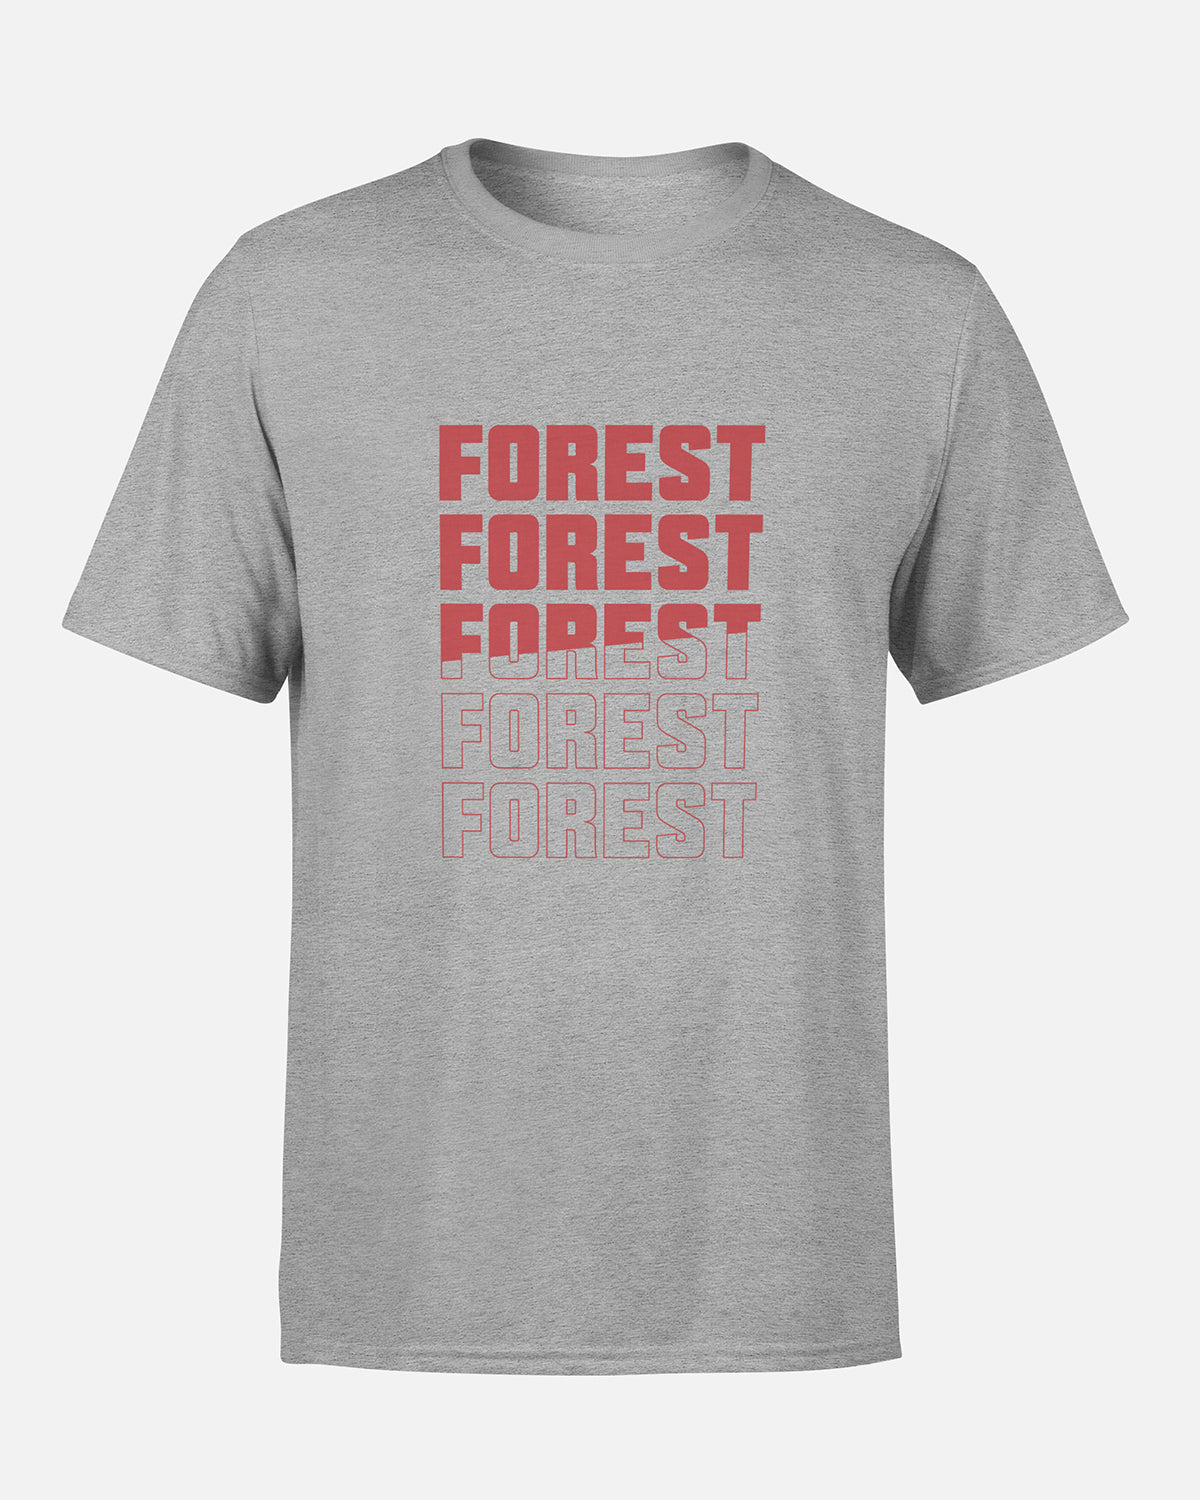 NFFC Men's Grey Forest Repeat Tee